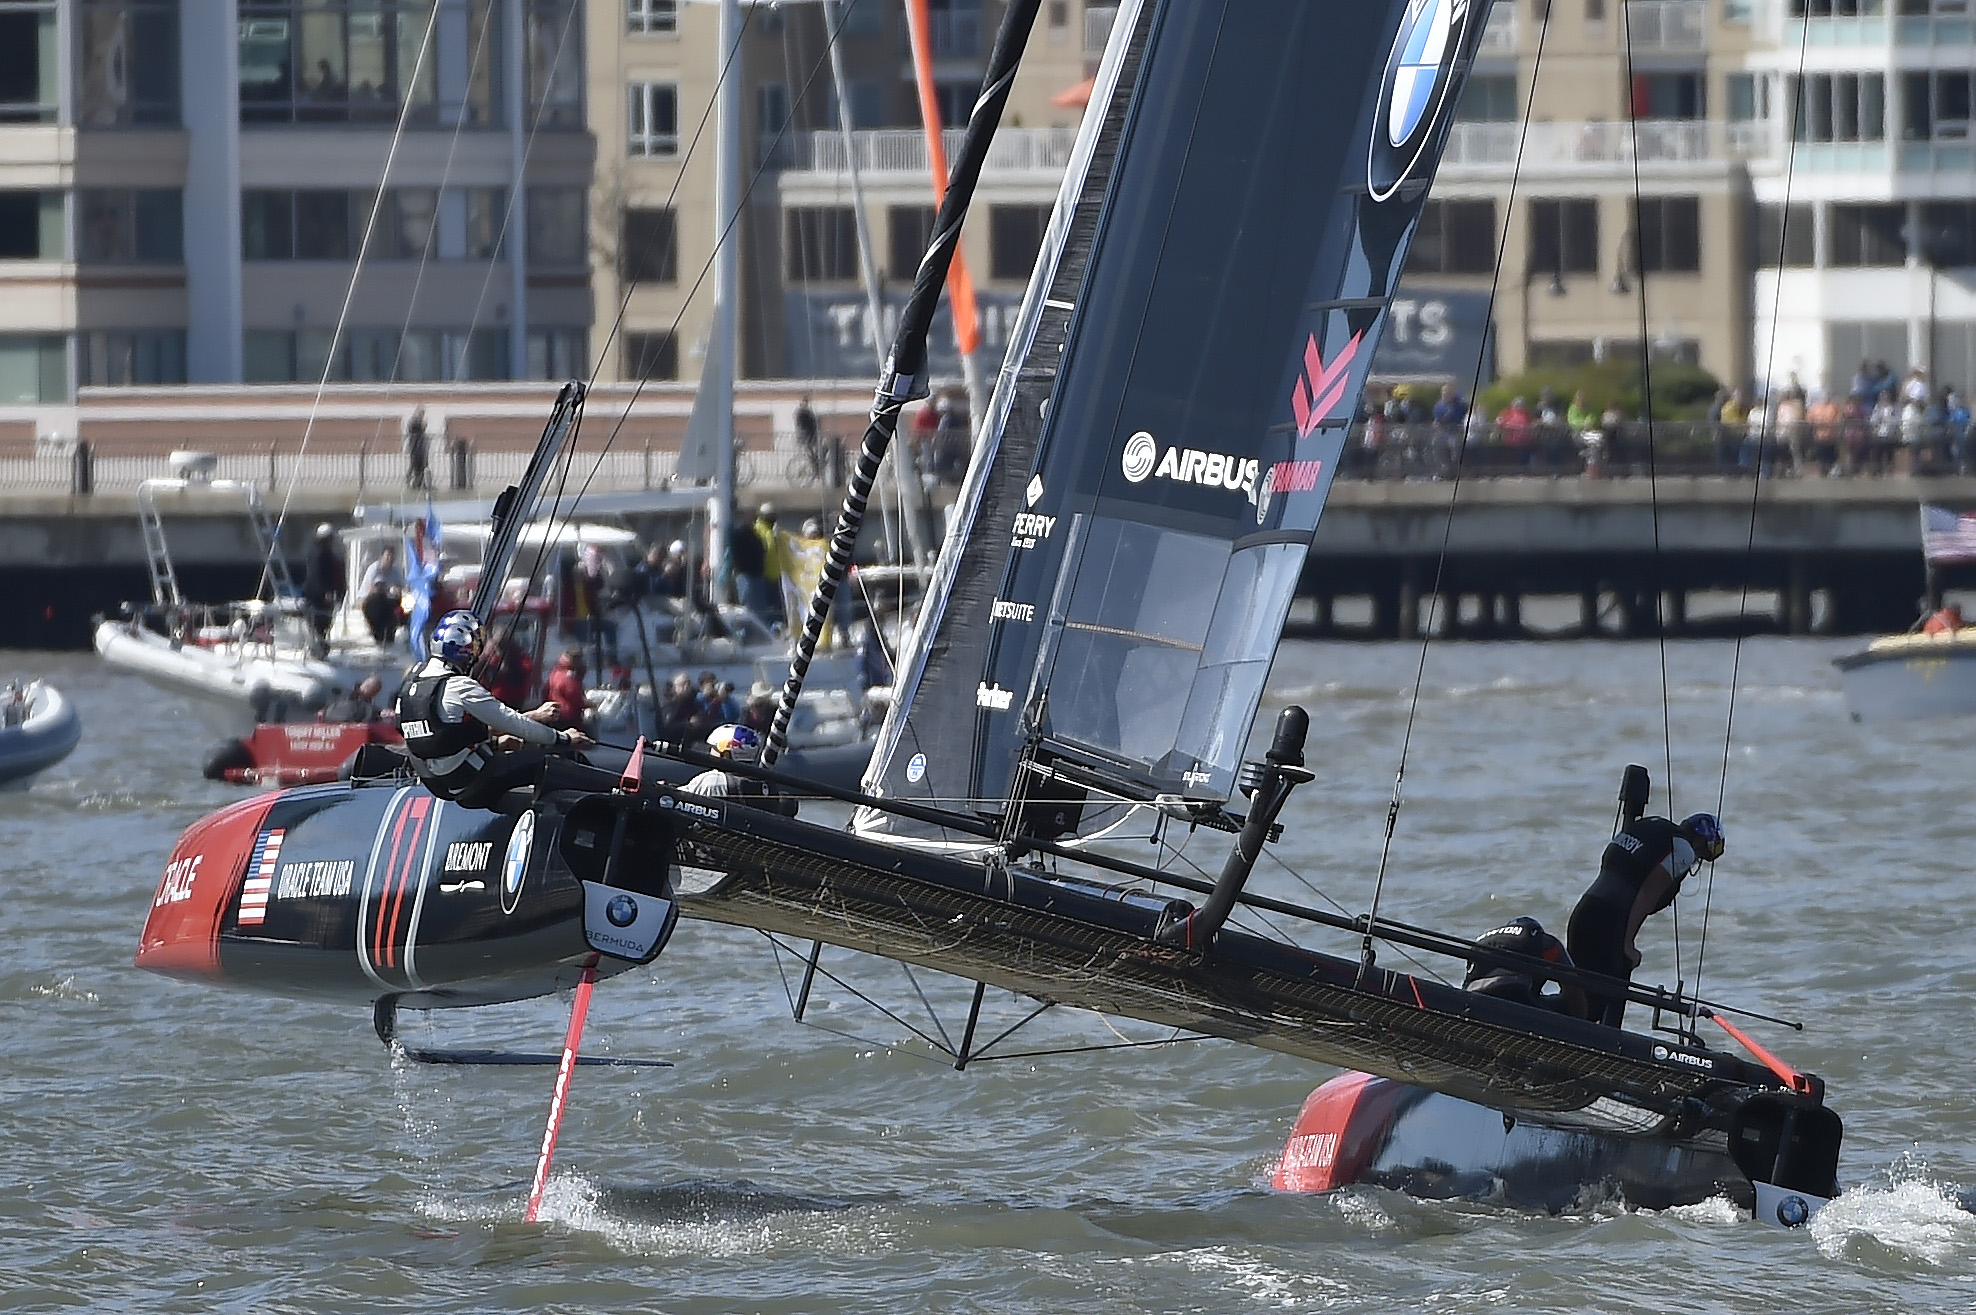 THE LOUIS VUITTON AMERICA'S CUP IN CHICAGO - News